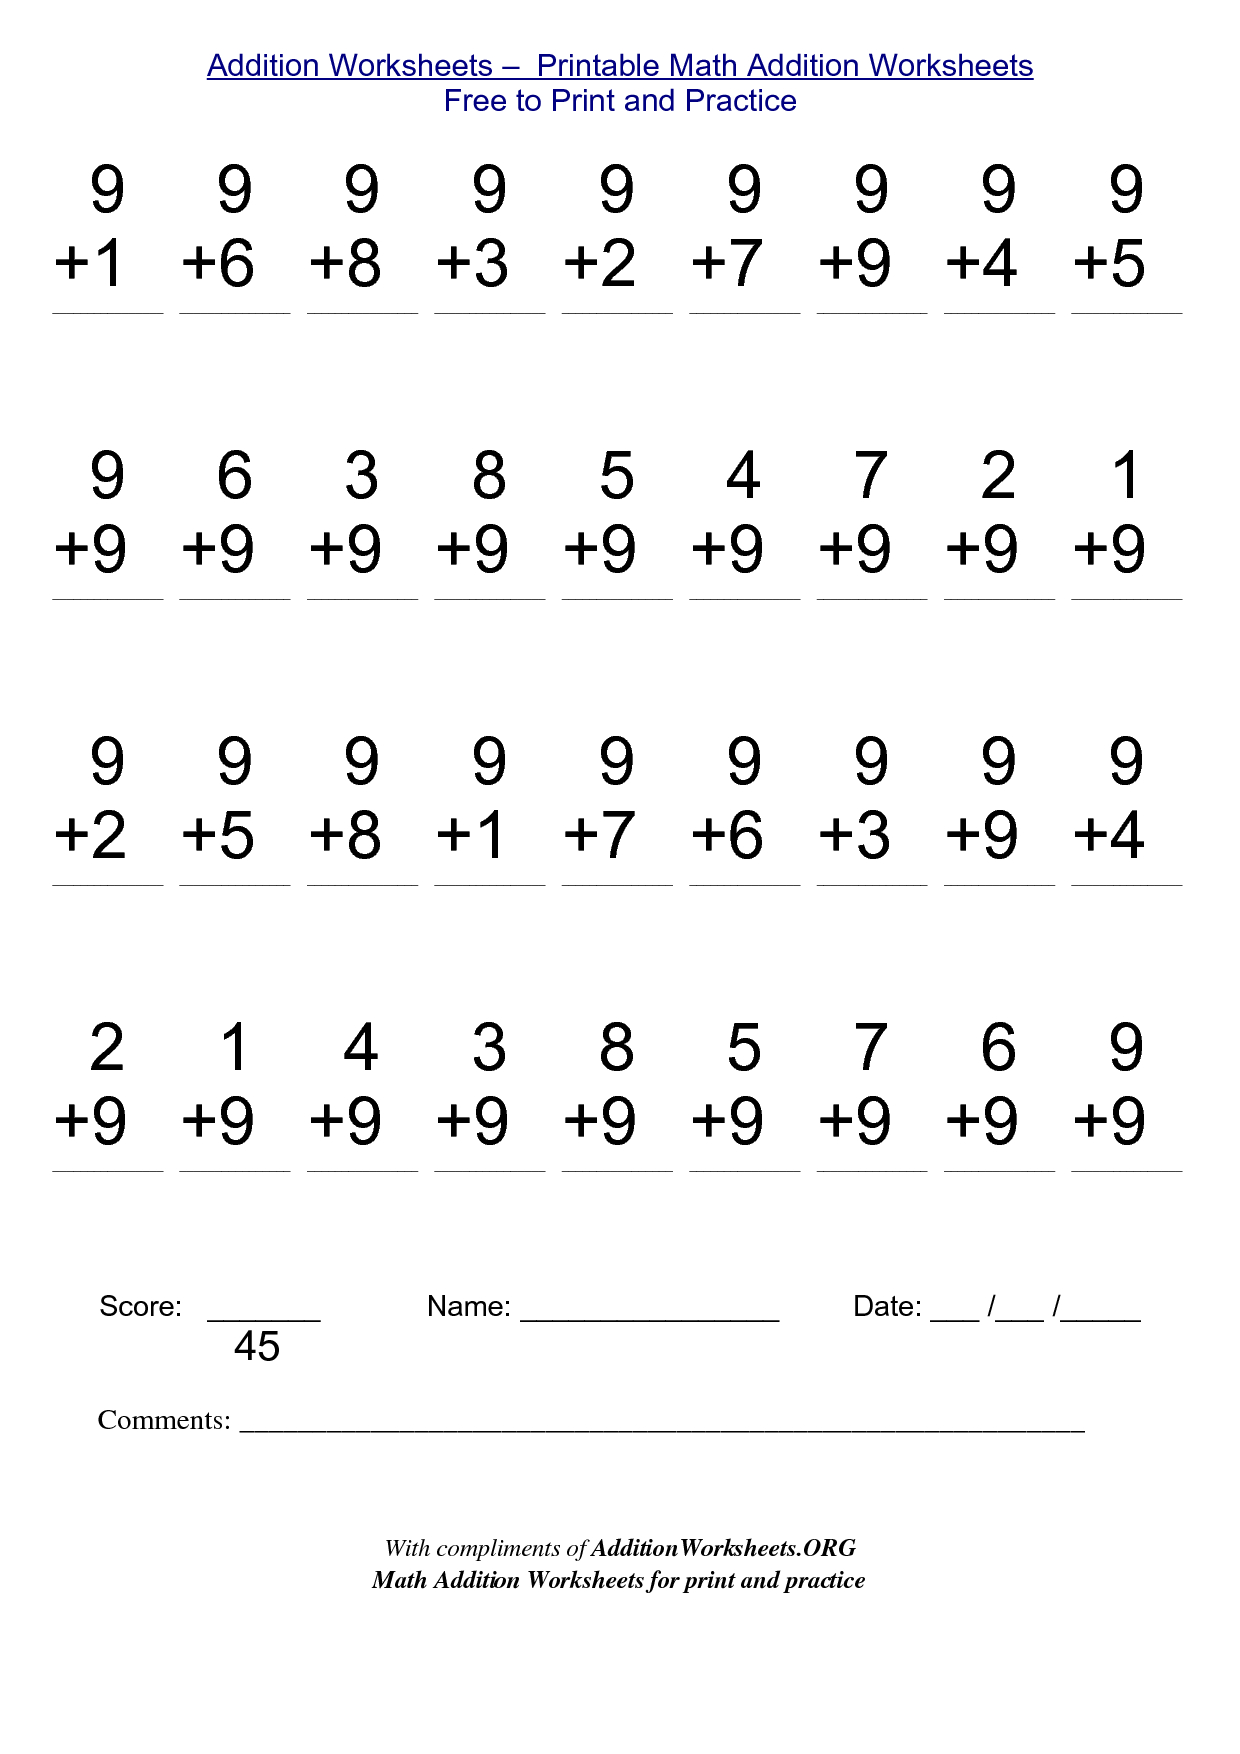 Math Worksheets For Free To Print - Alot | Me | Pinterest | Math - Free Printable Second Grade Math Worksheets